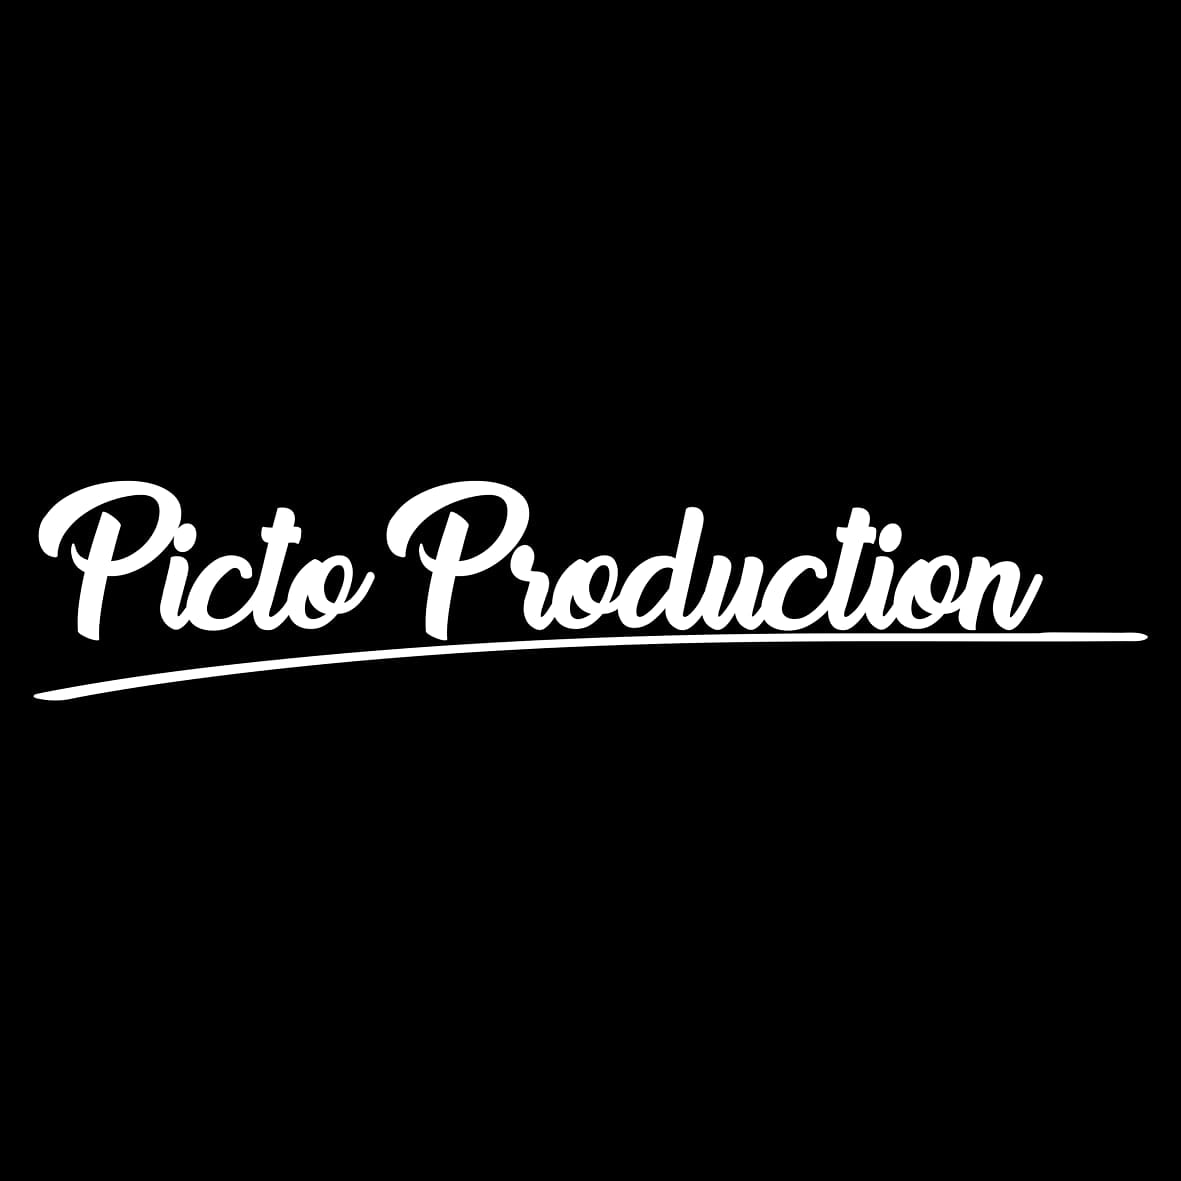 Picto Production